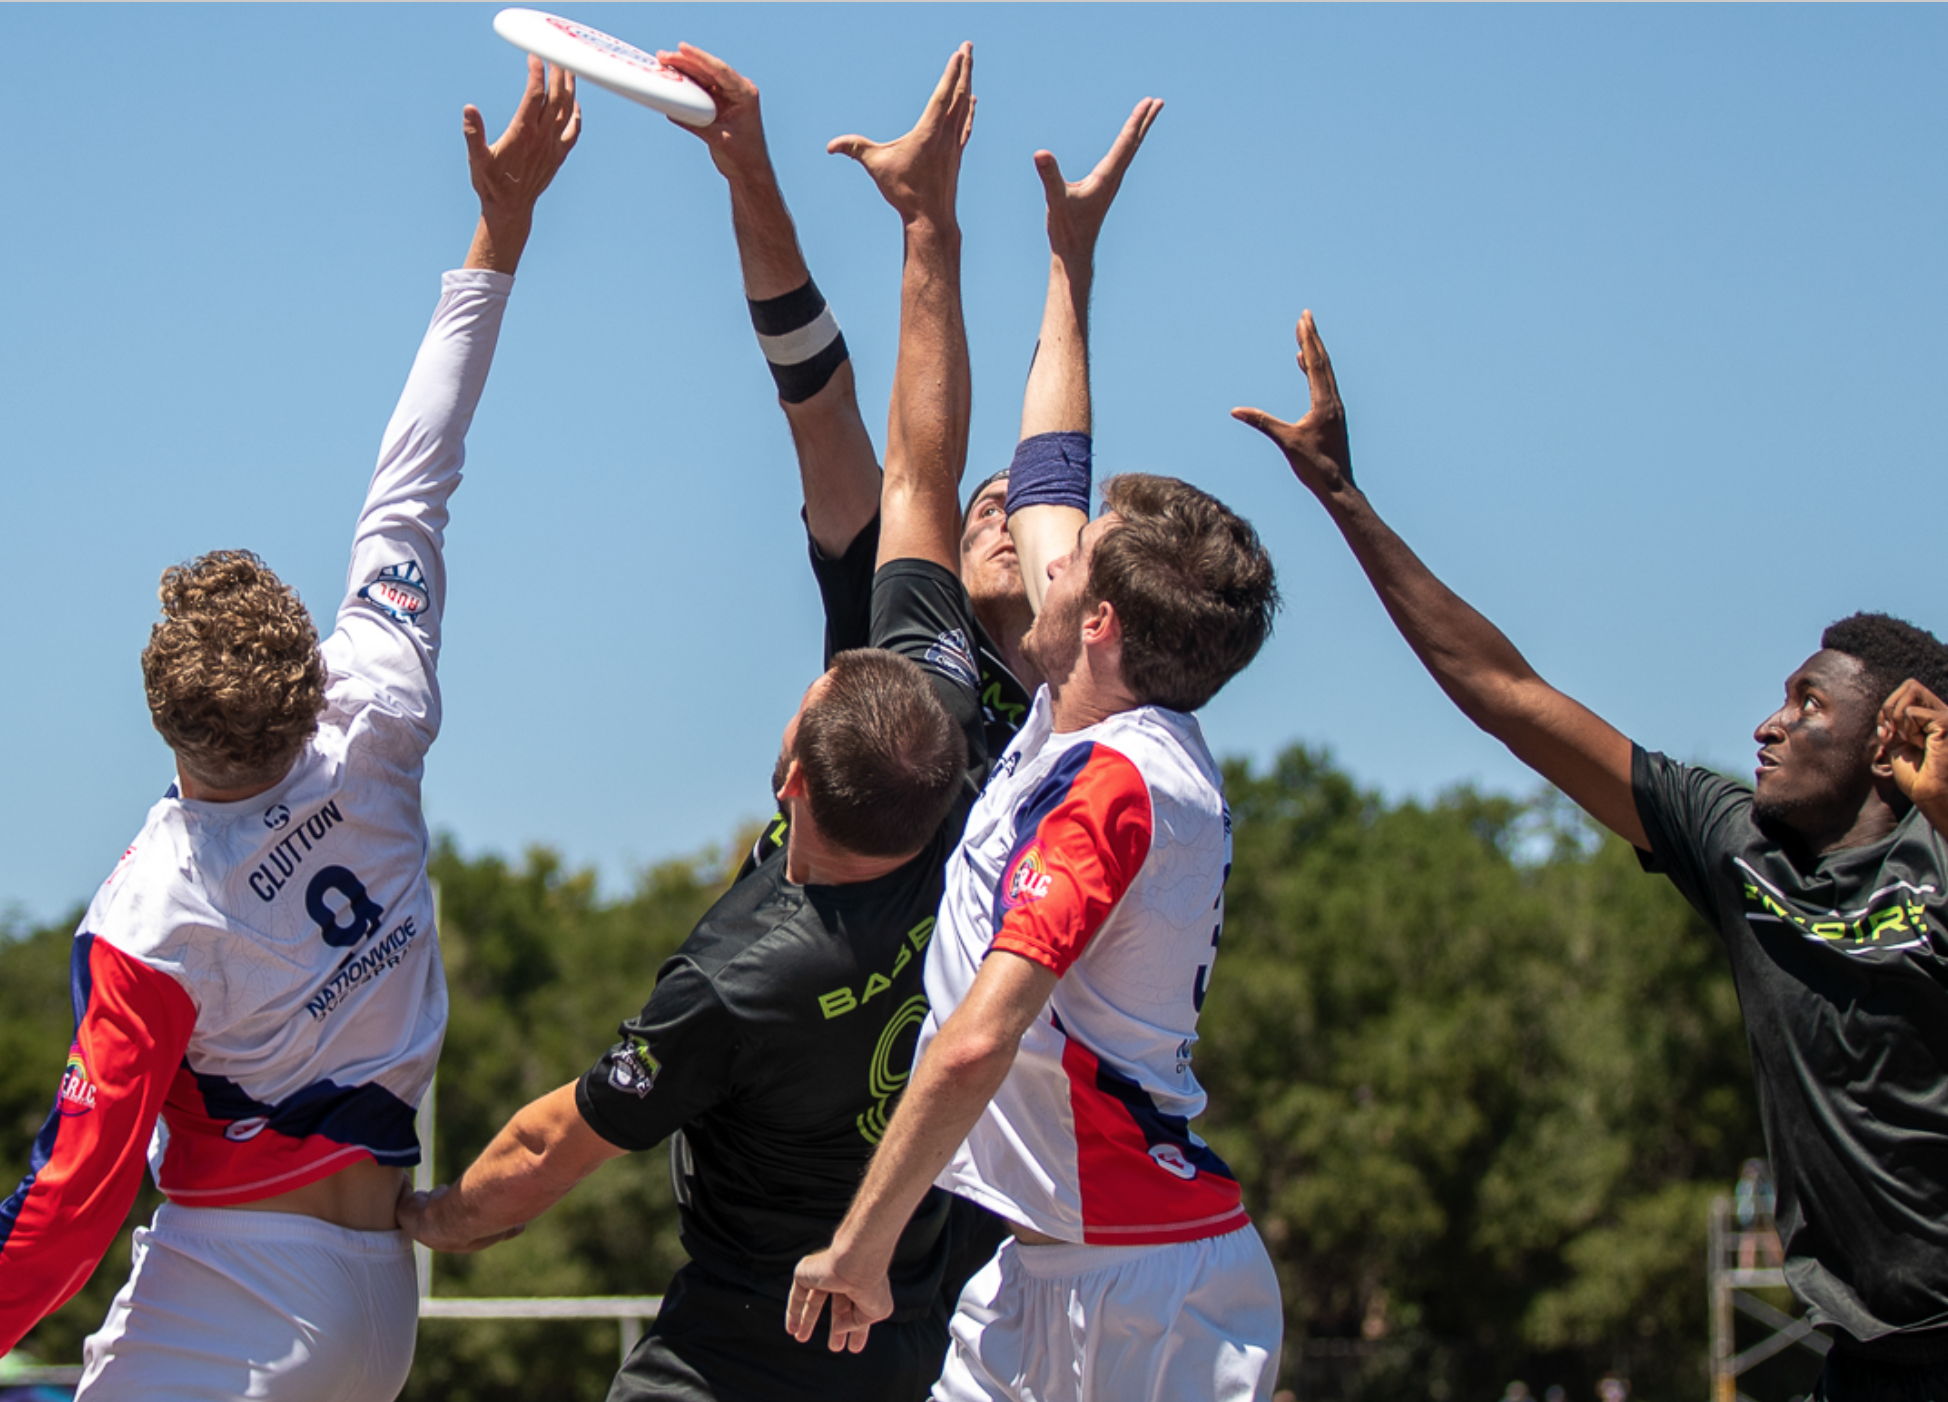 American Ultimate Disc League: AUDL has built the platform to make